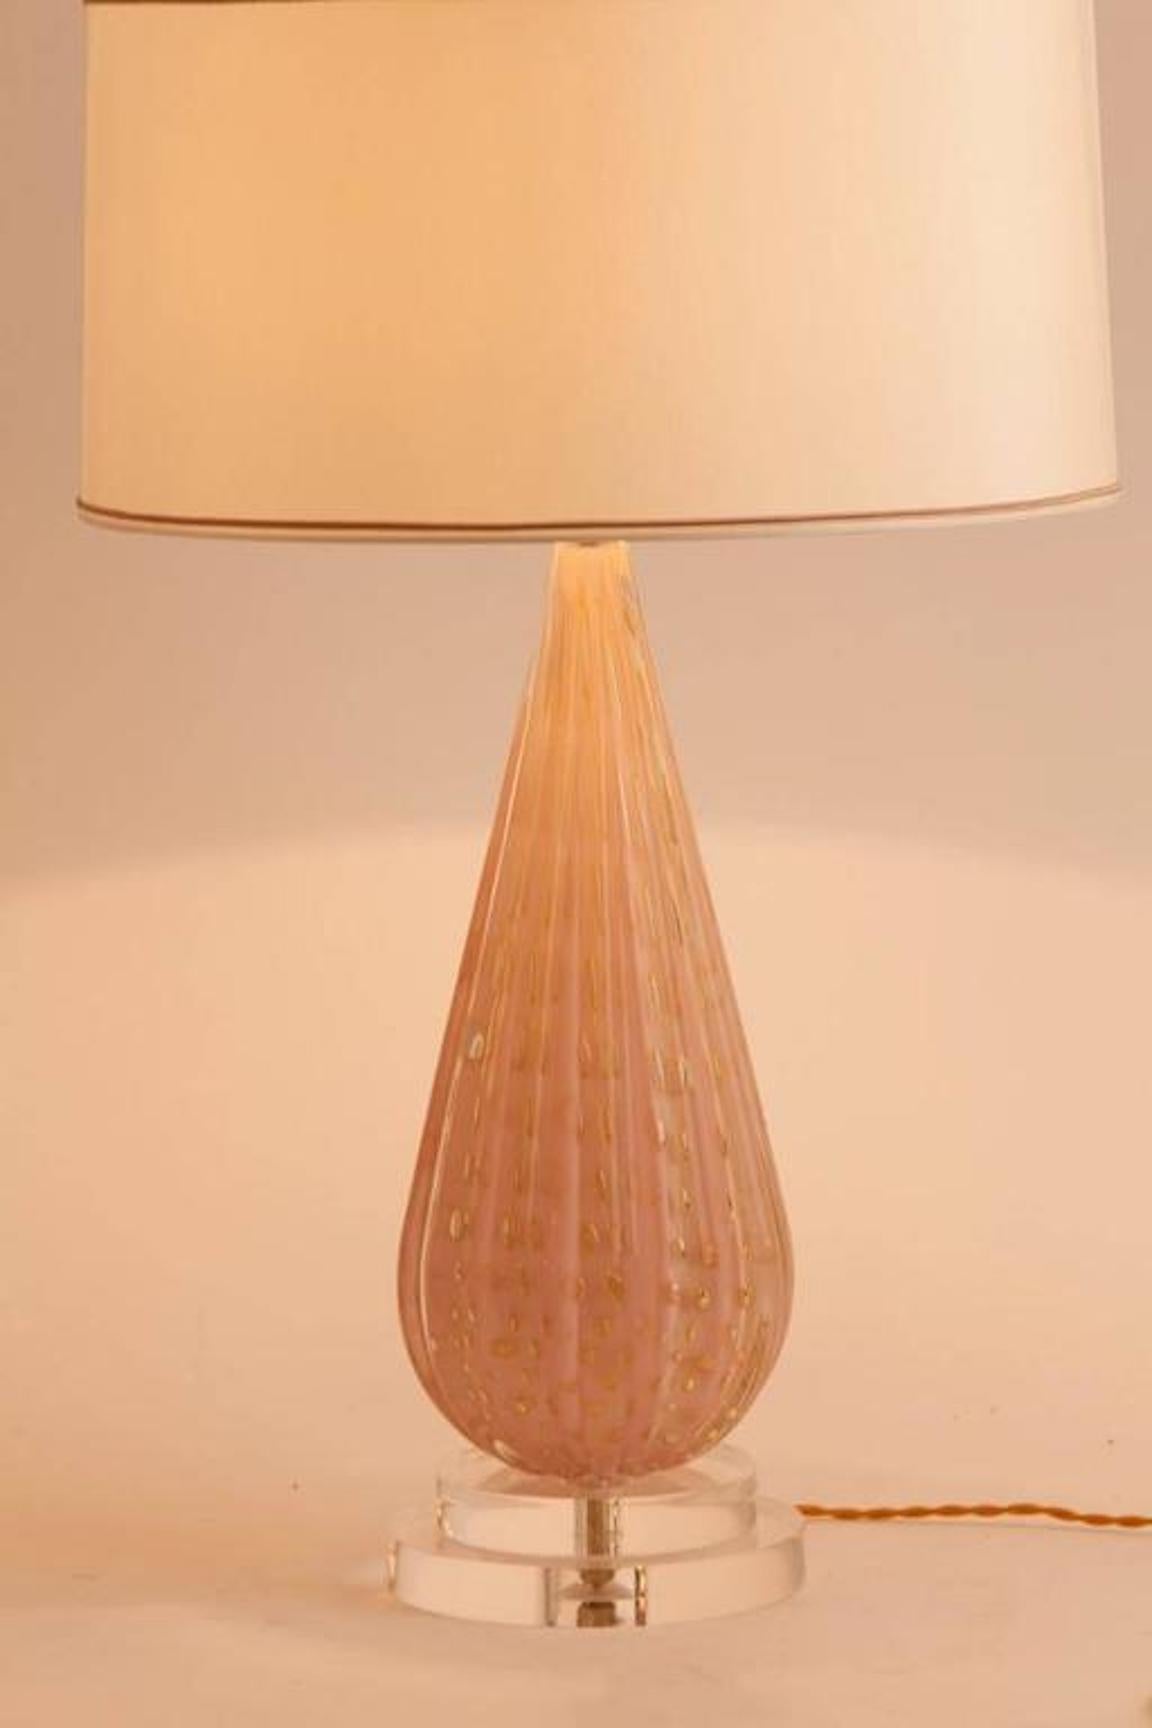 pink and gold lamp